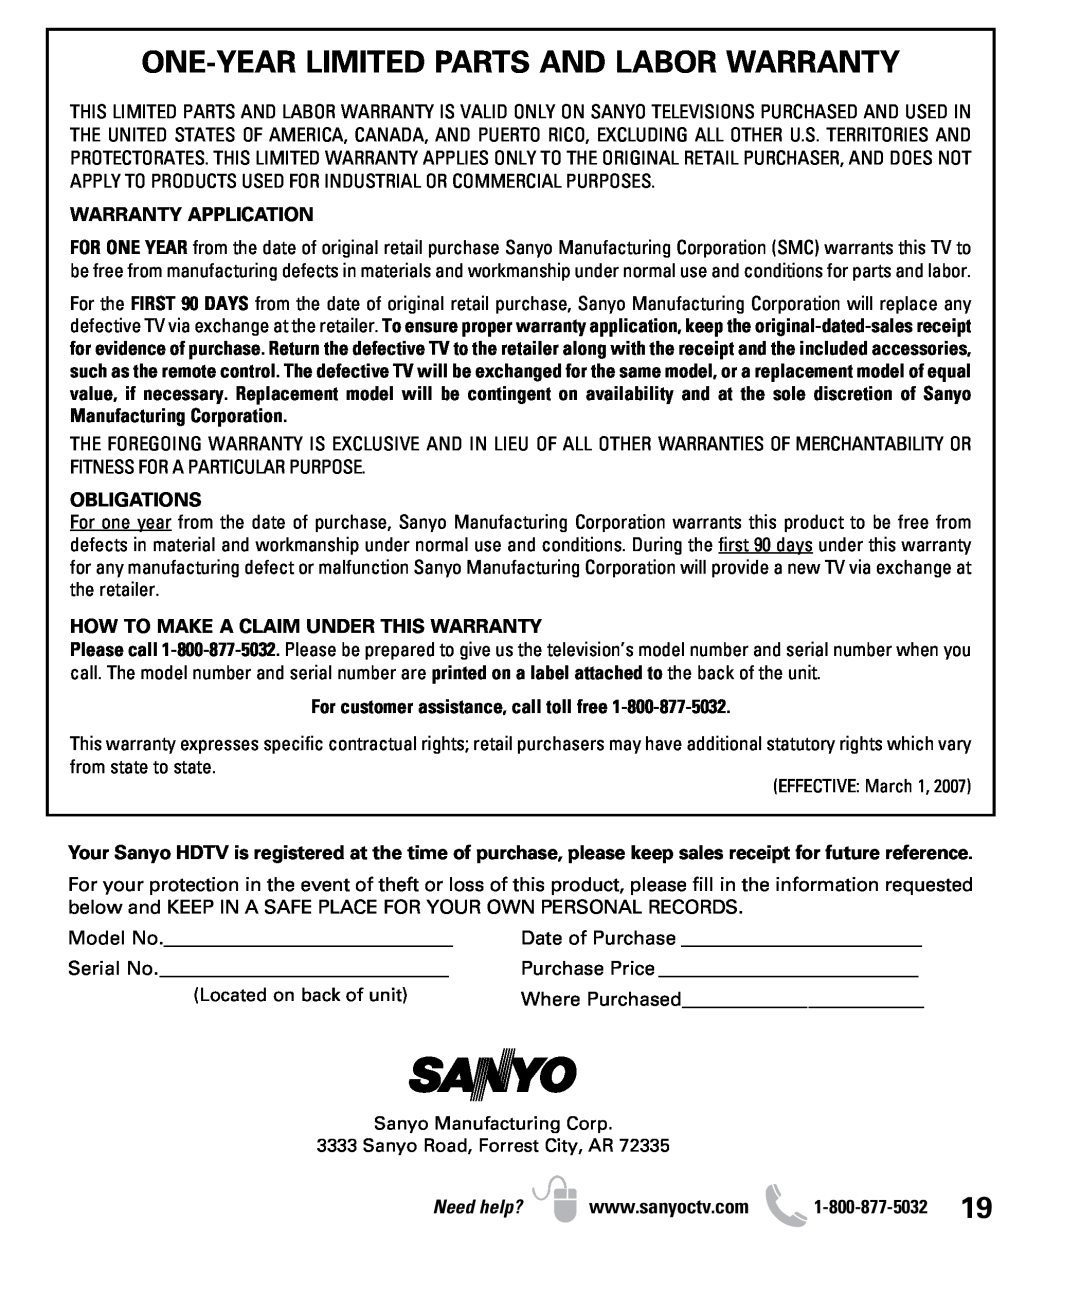 Sanyo DP50710 owner manual One-Year Limited Parts And Labor Warranty, Warranty Application, Obligations, Need help? 